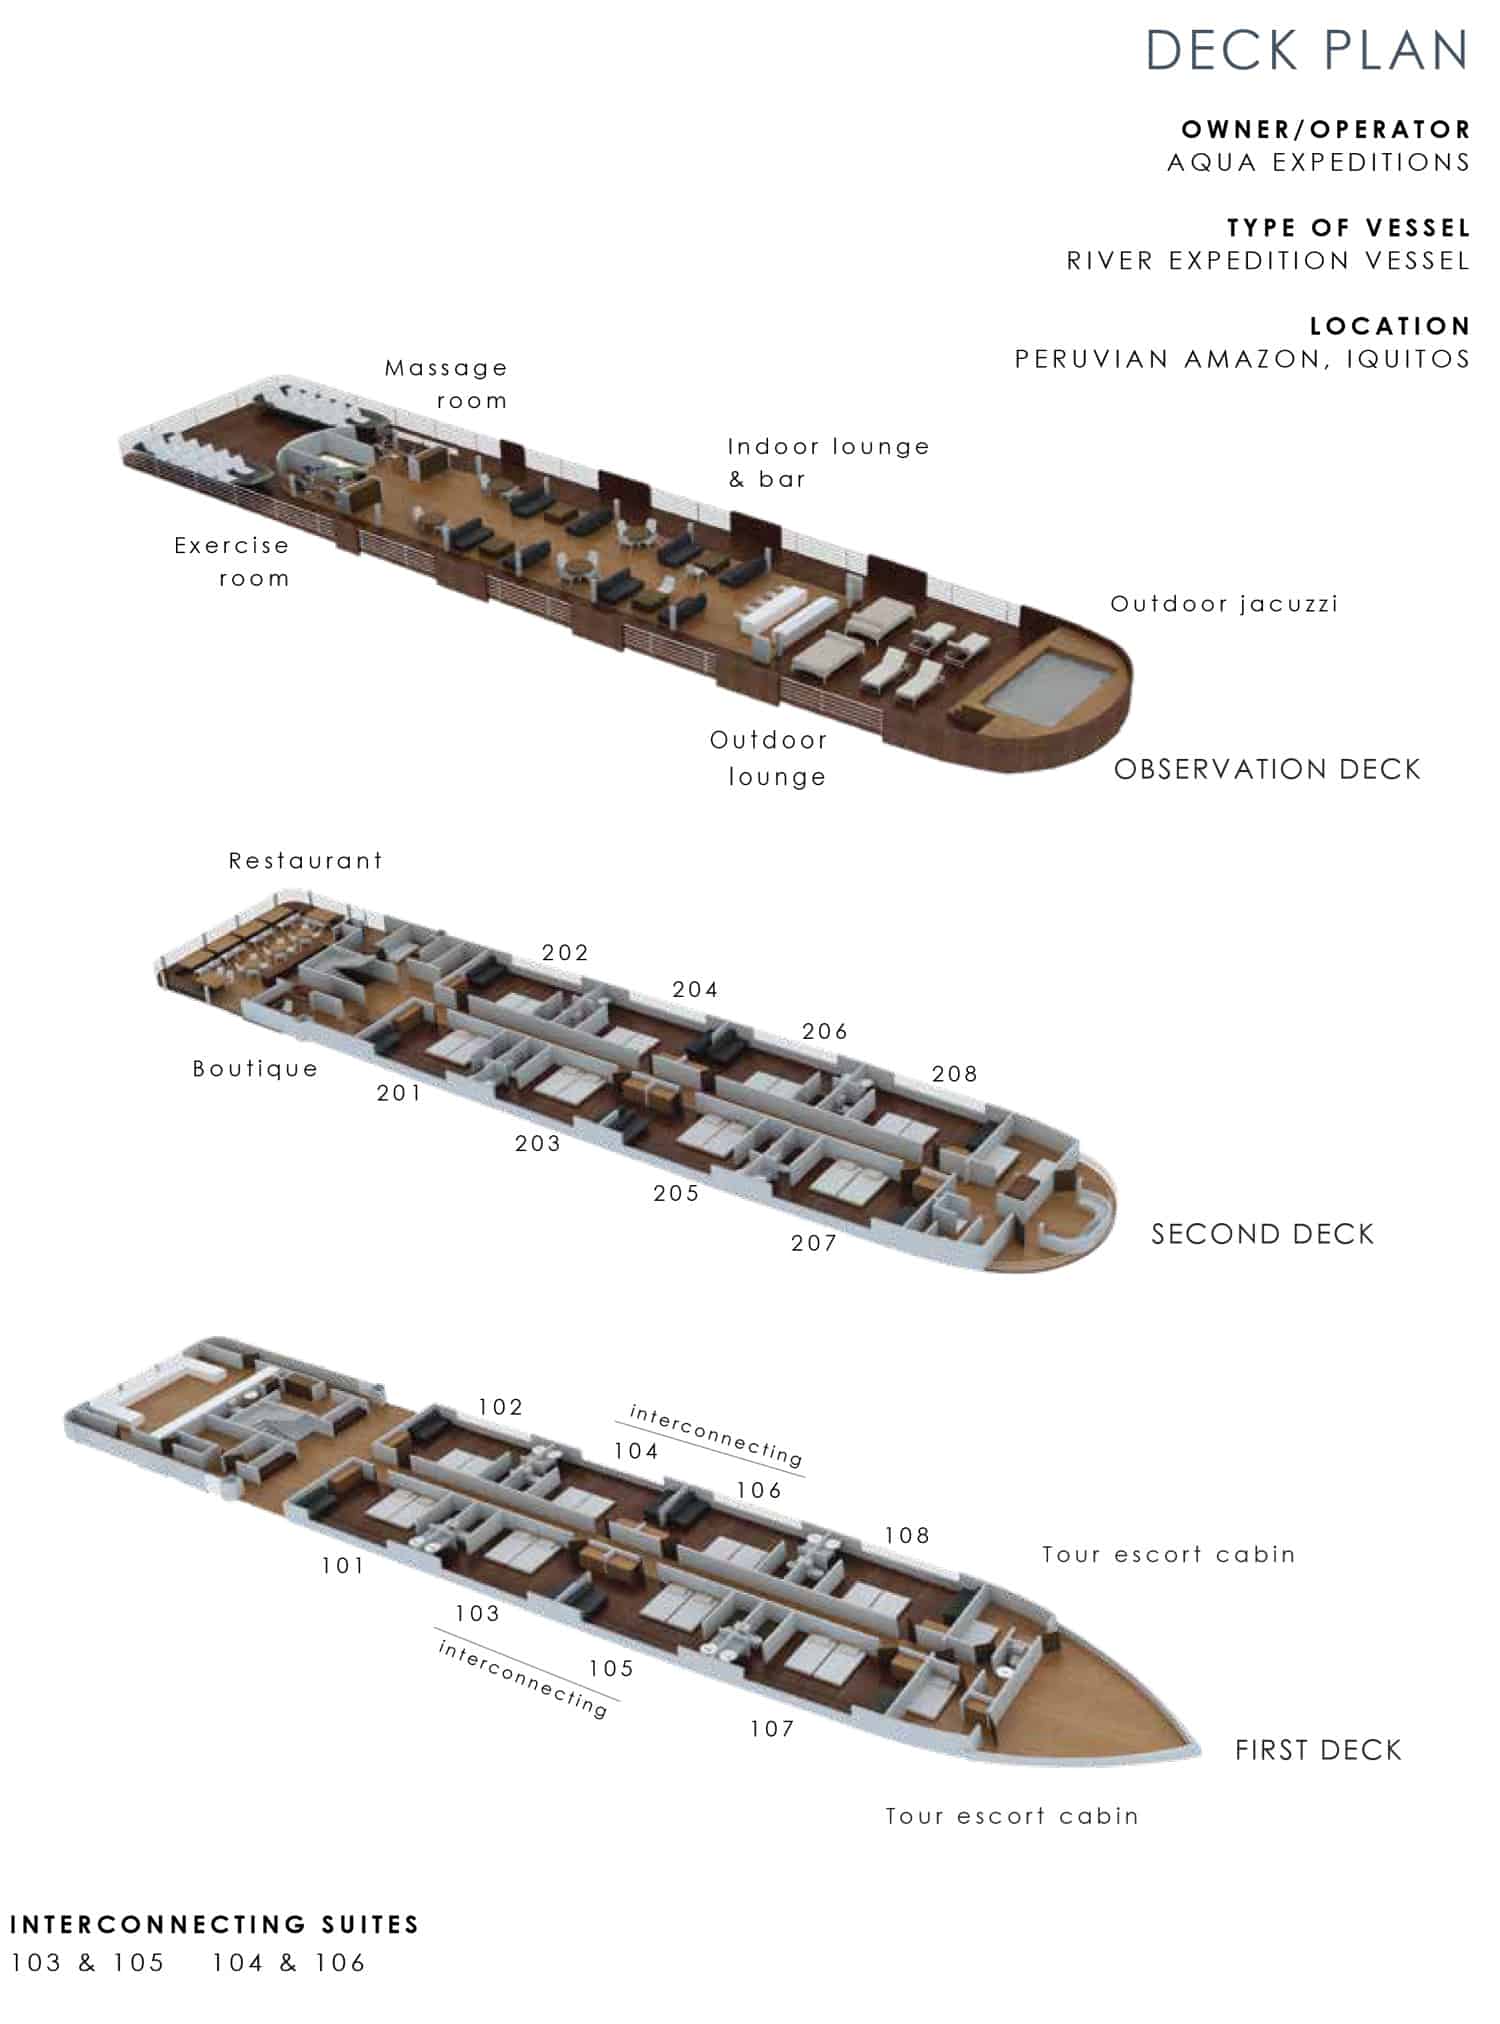 Aria small ship deck plan showing first, second, and observation decks.